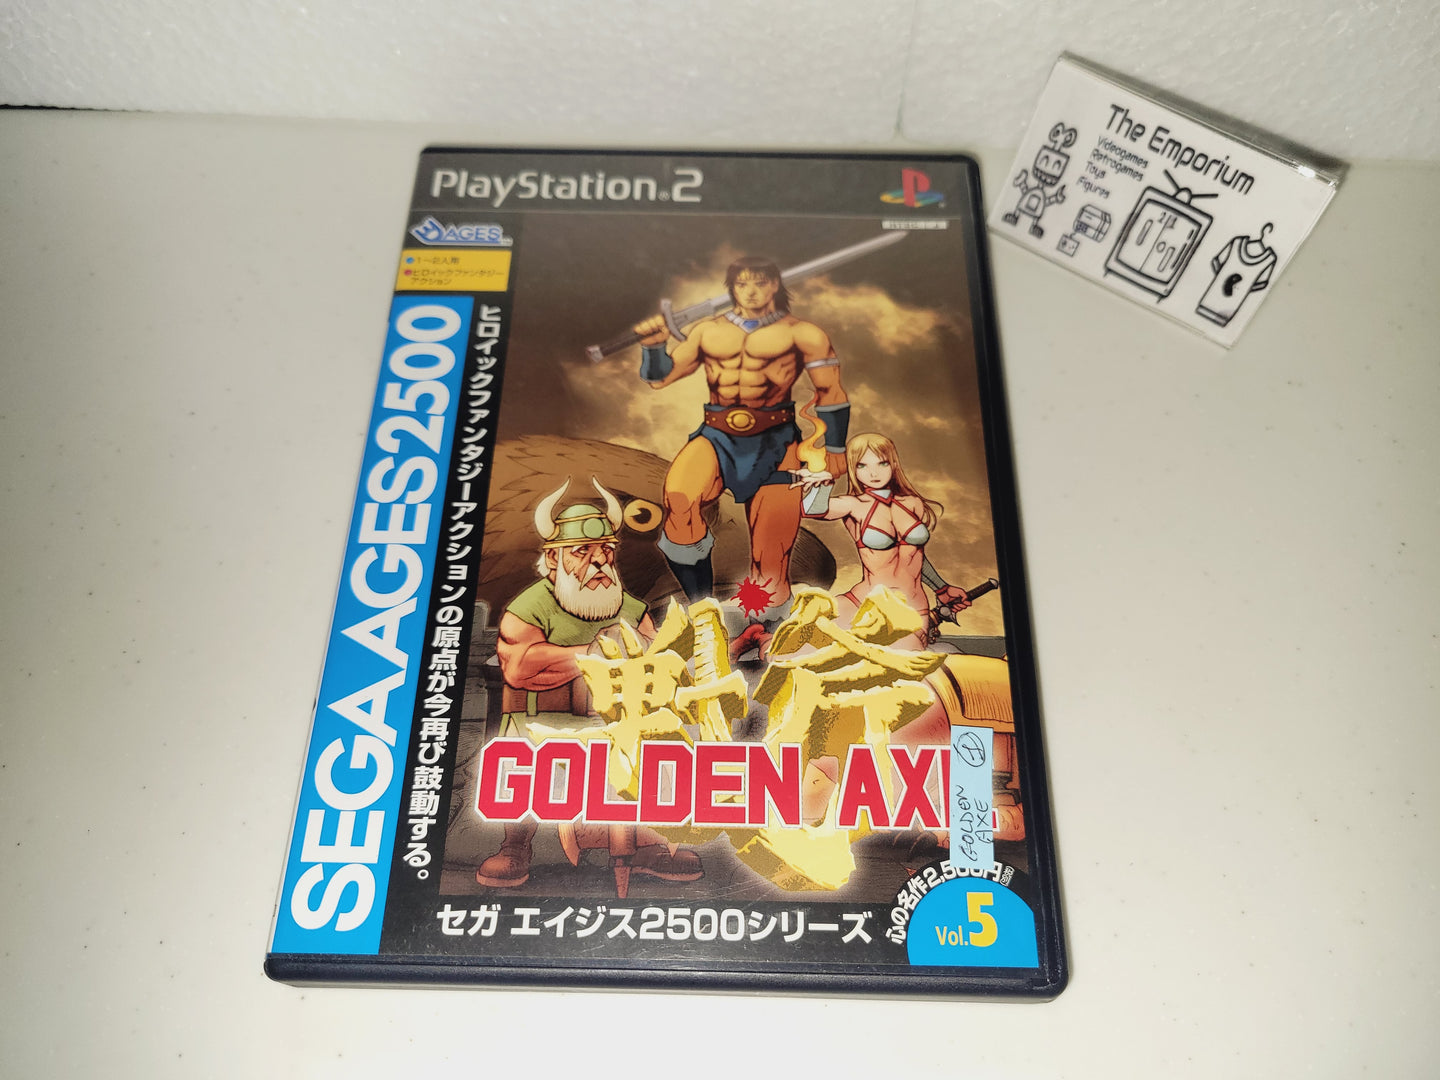 Sega Ages 2500 Series Vol. 5: Golden Axe - Sony playstation 2